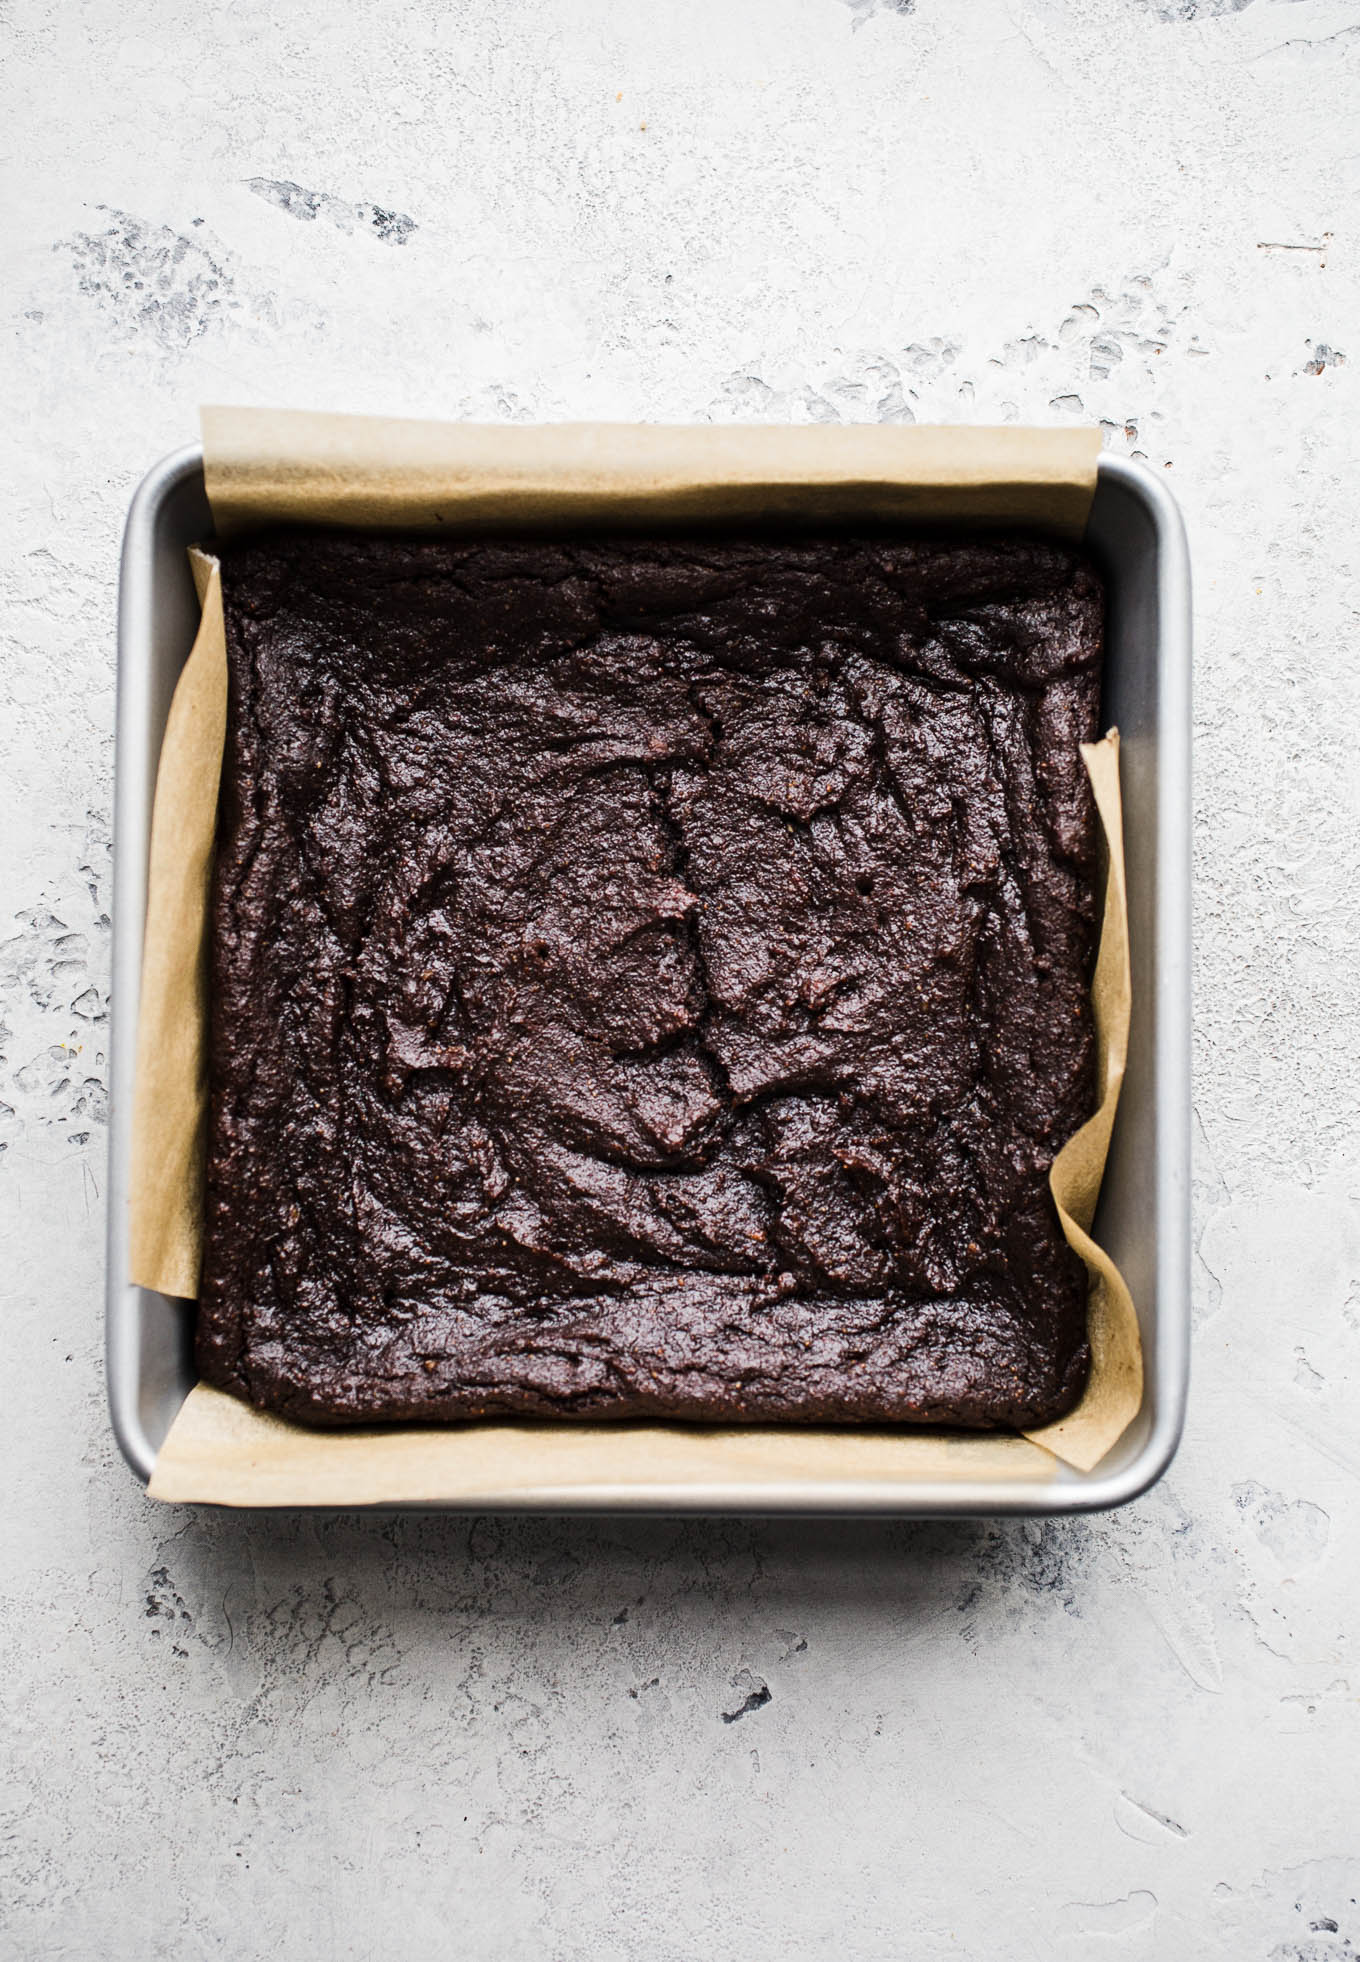 Easy Sweet Potato Brownies made with 5 ingredients for a decadent, healthier brownie. Gluten-free, vegan, refined sugar-free. 